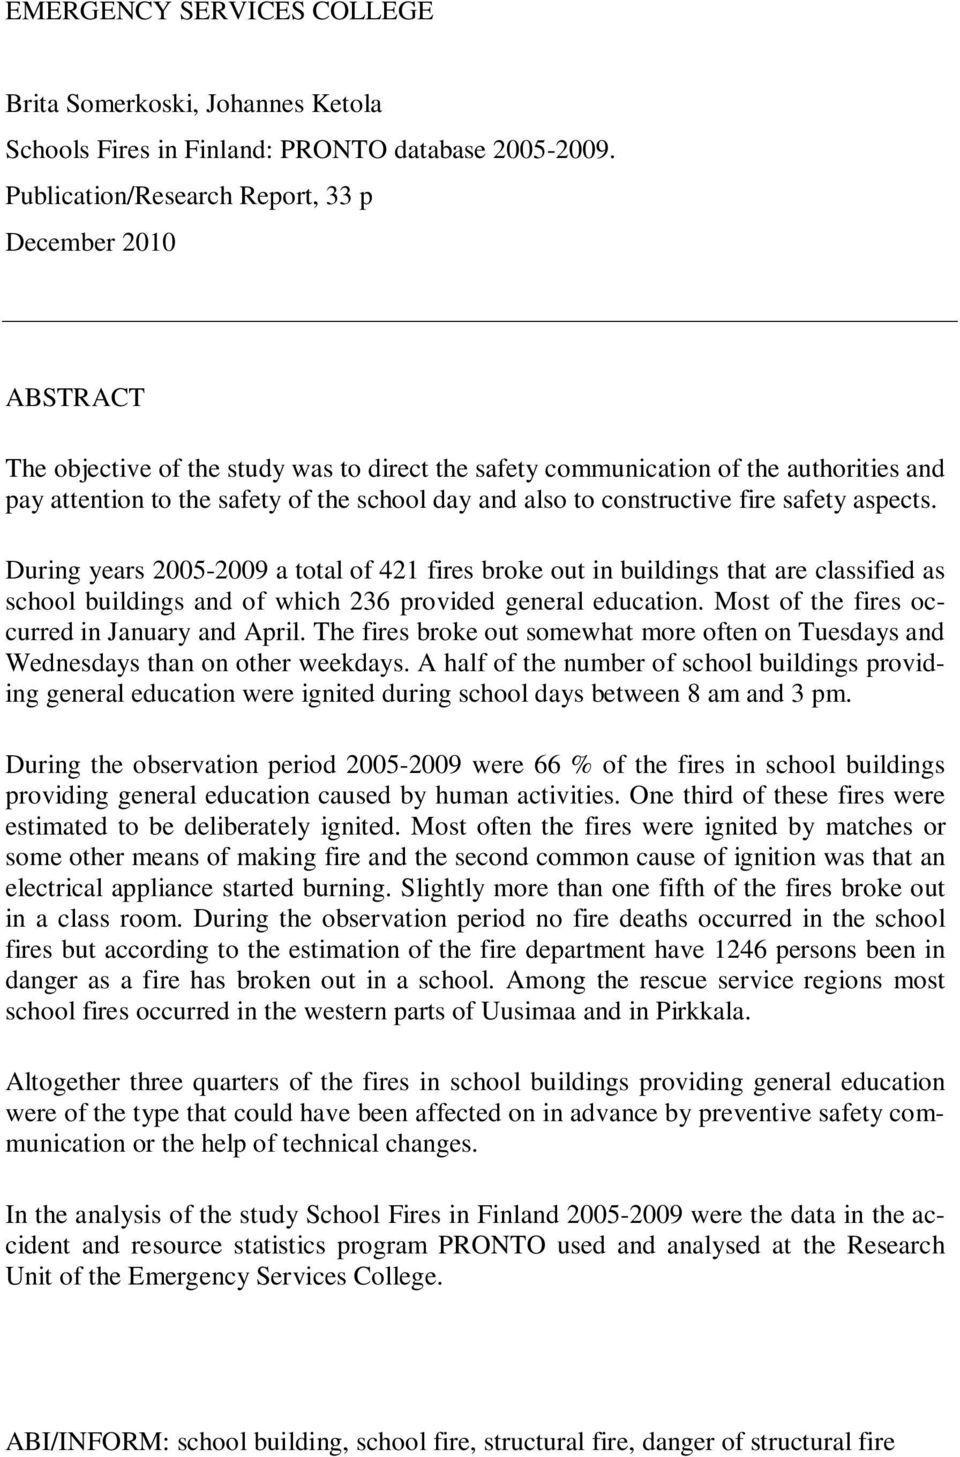 also to constructive fire safety aspects. During years 2005-2009 a total of 421 fires broke out in buildings that are classified as school buildings and of which 236 provided general education.